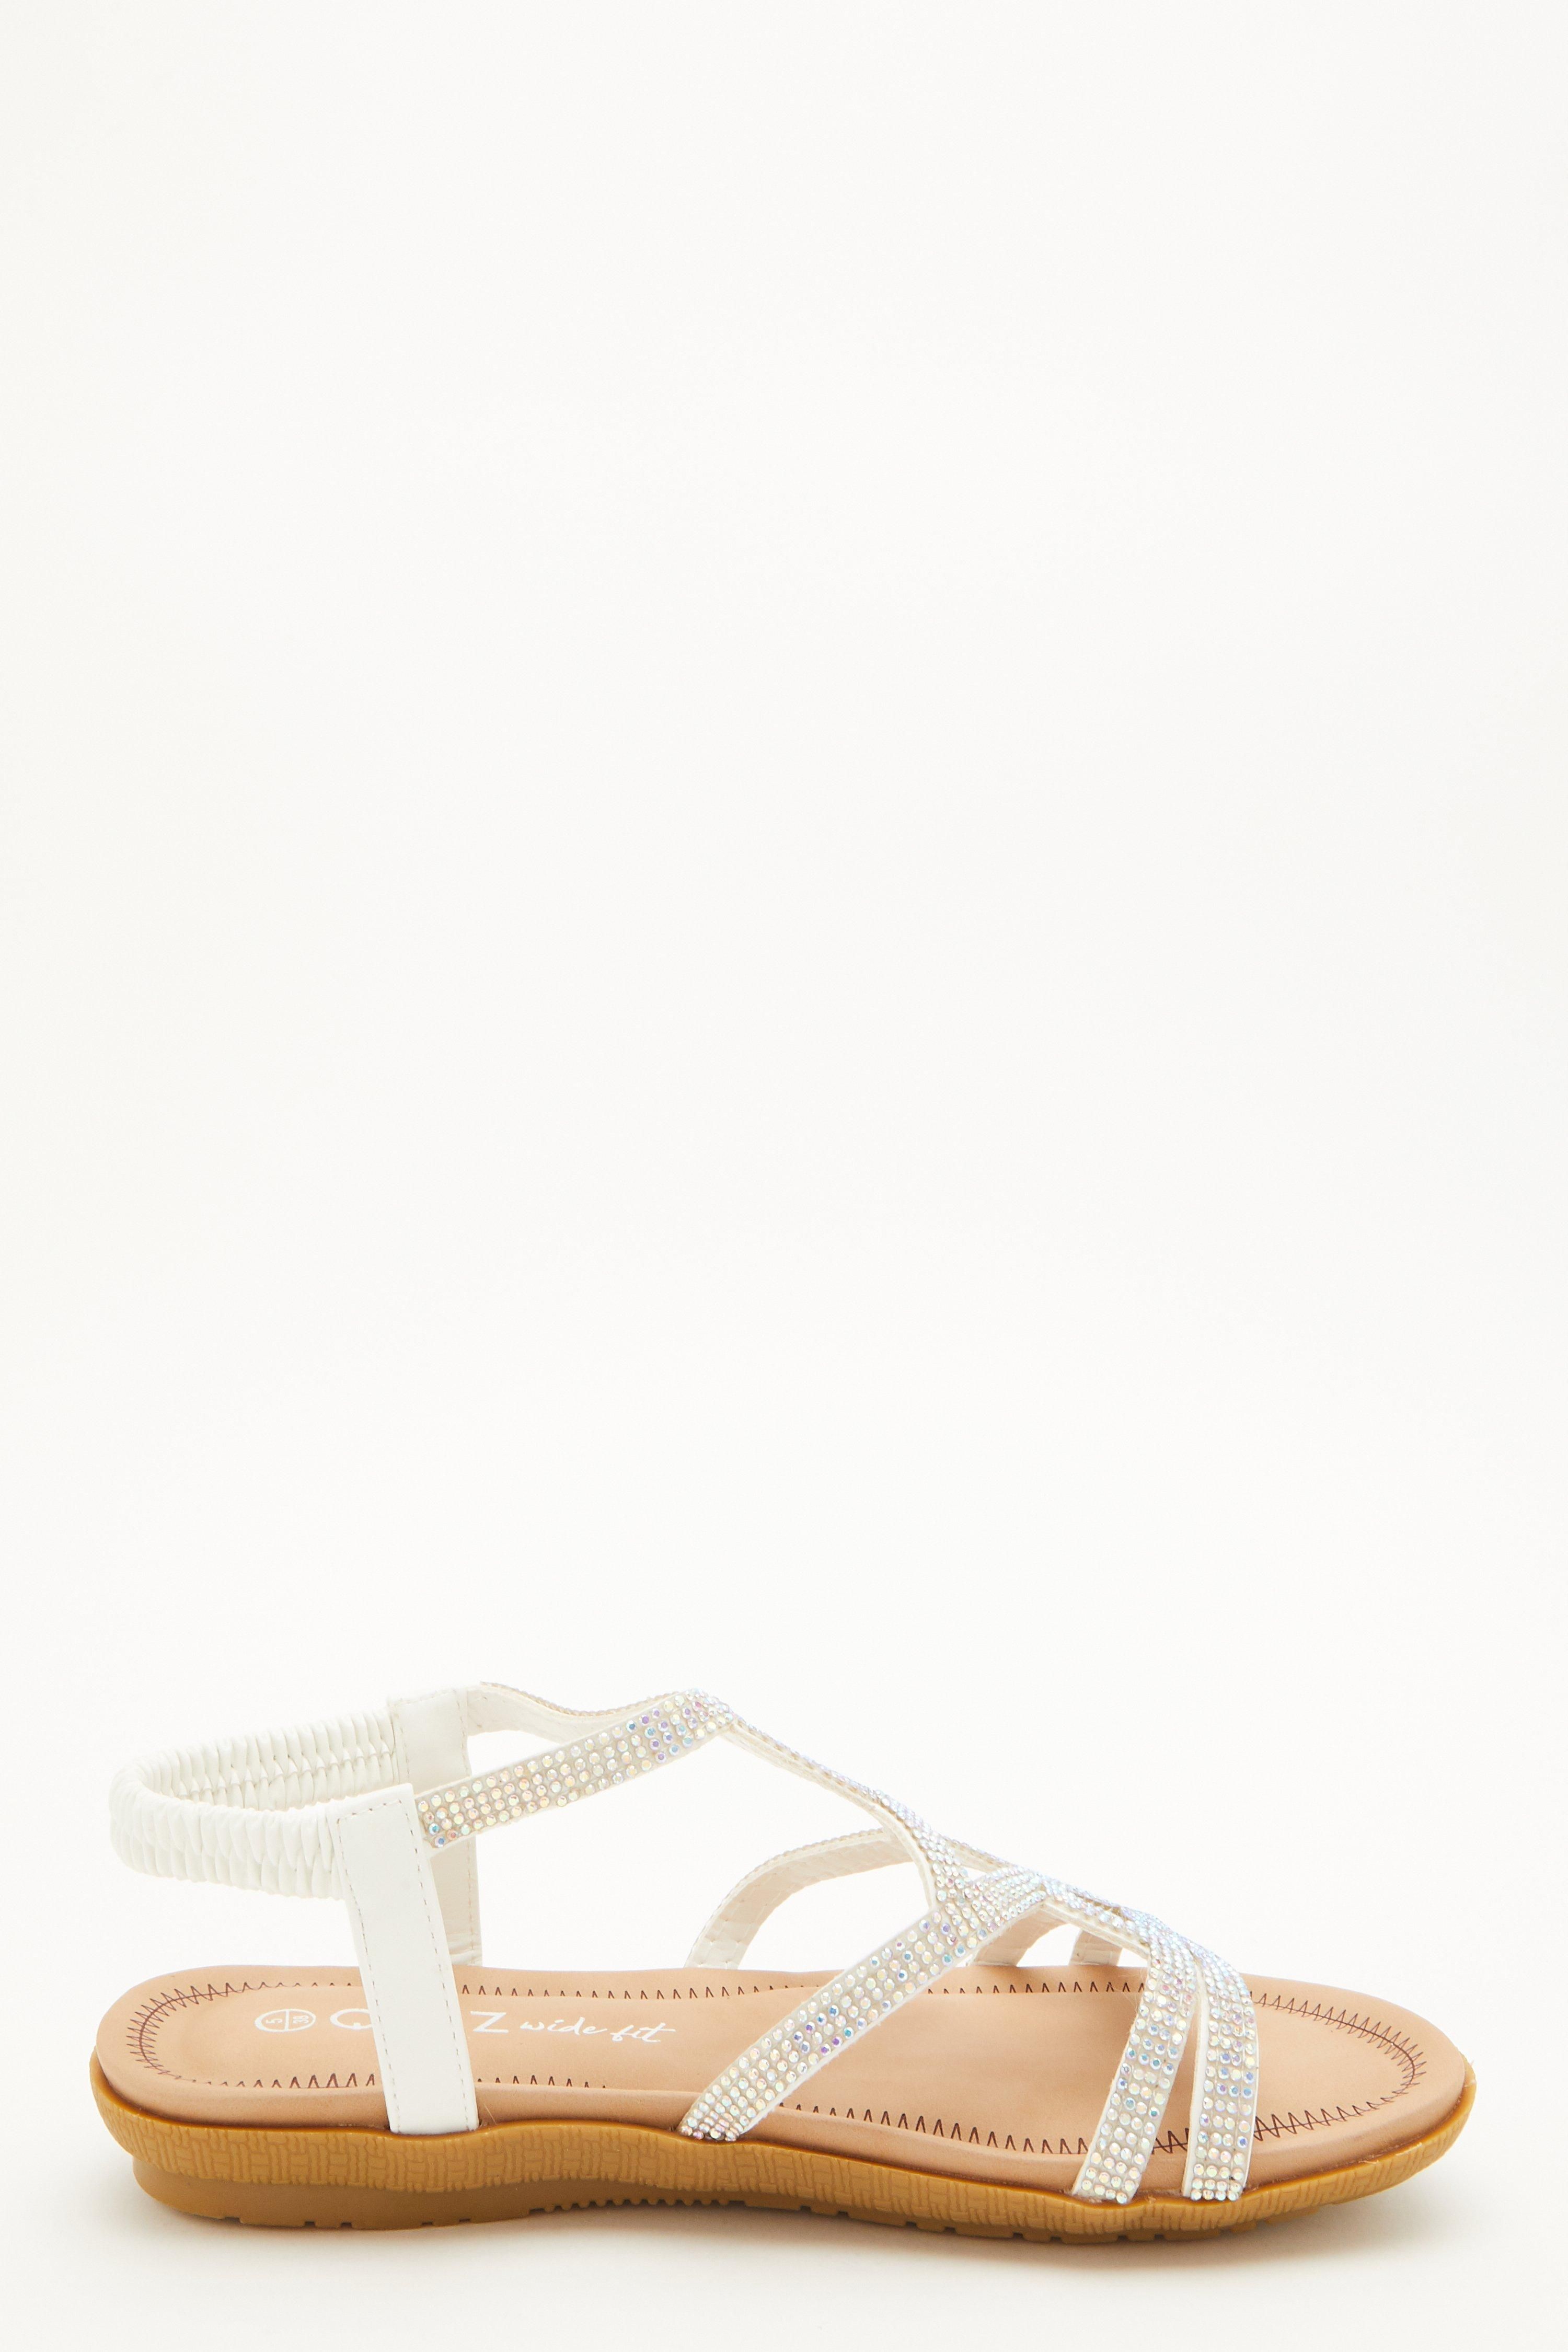 - Wide fit   - Flat sandals  - Diamante detail   - Twist strap desgin   - Elasticated strap  - Padded insole for added comfort